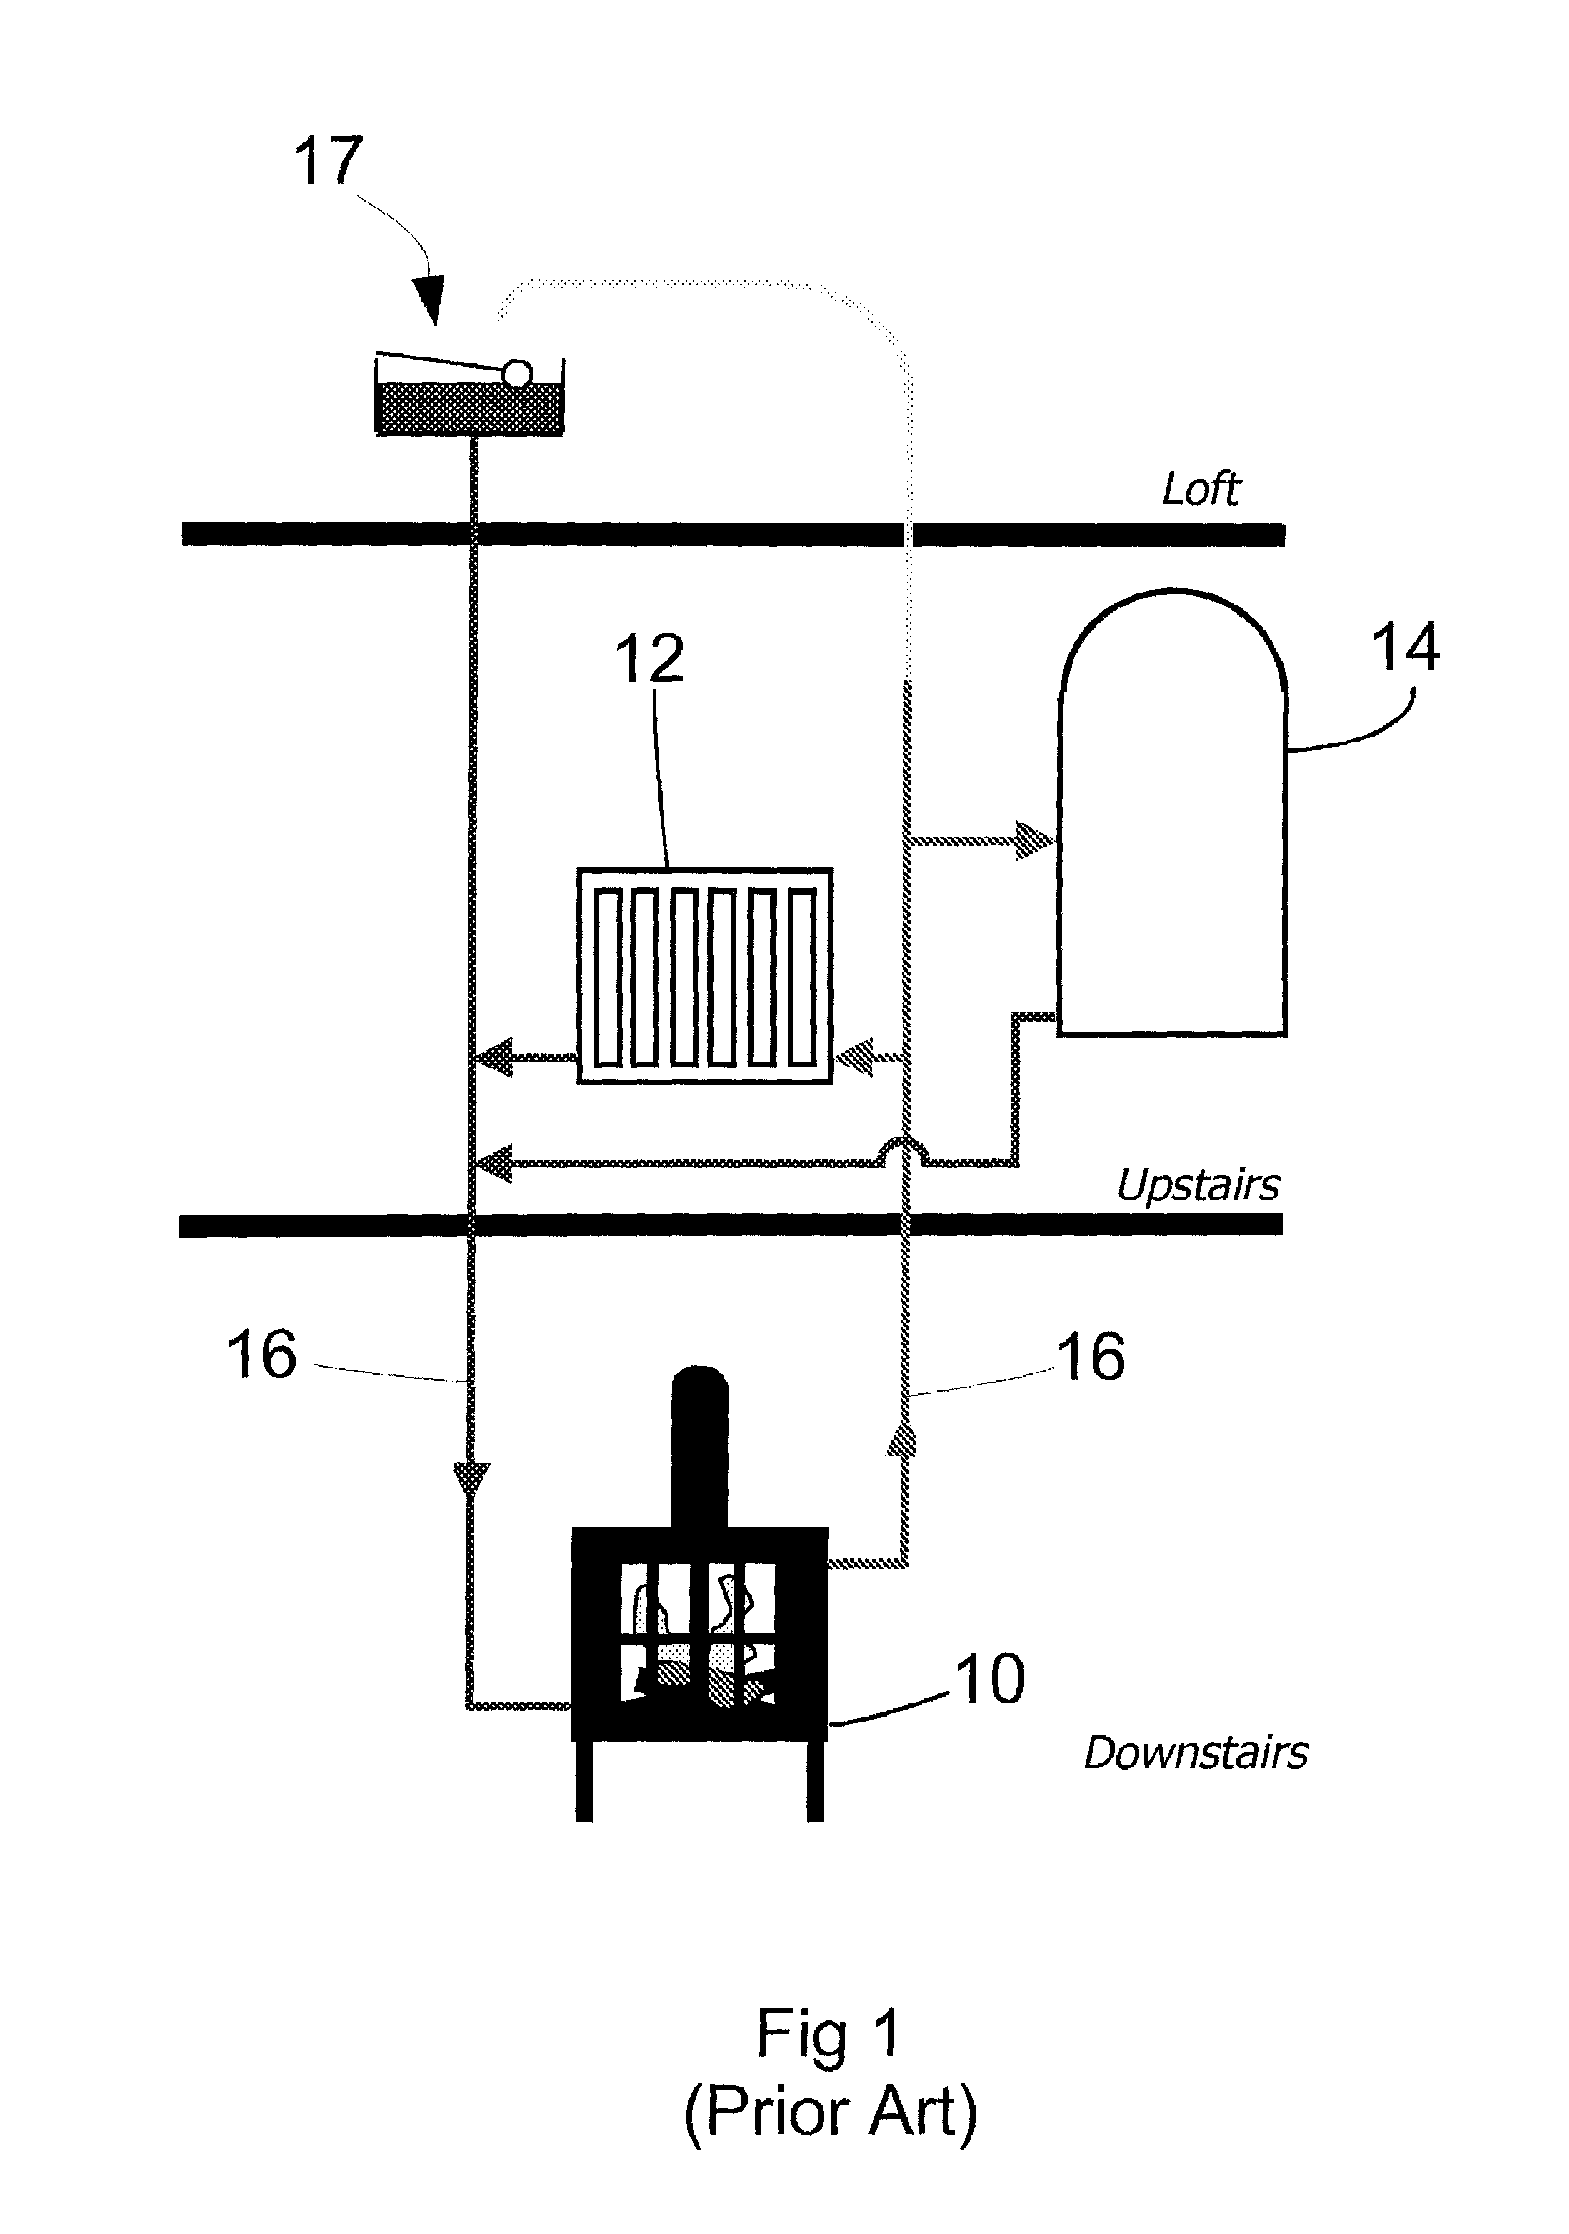 Apparatus for capturing heat from a stove